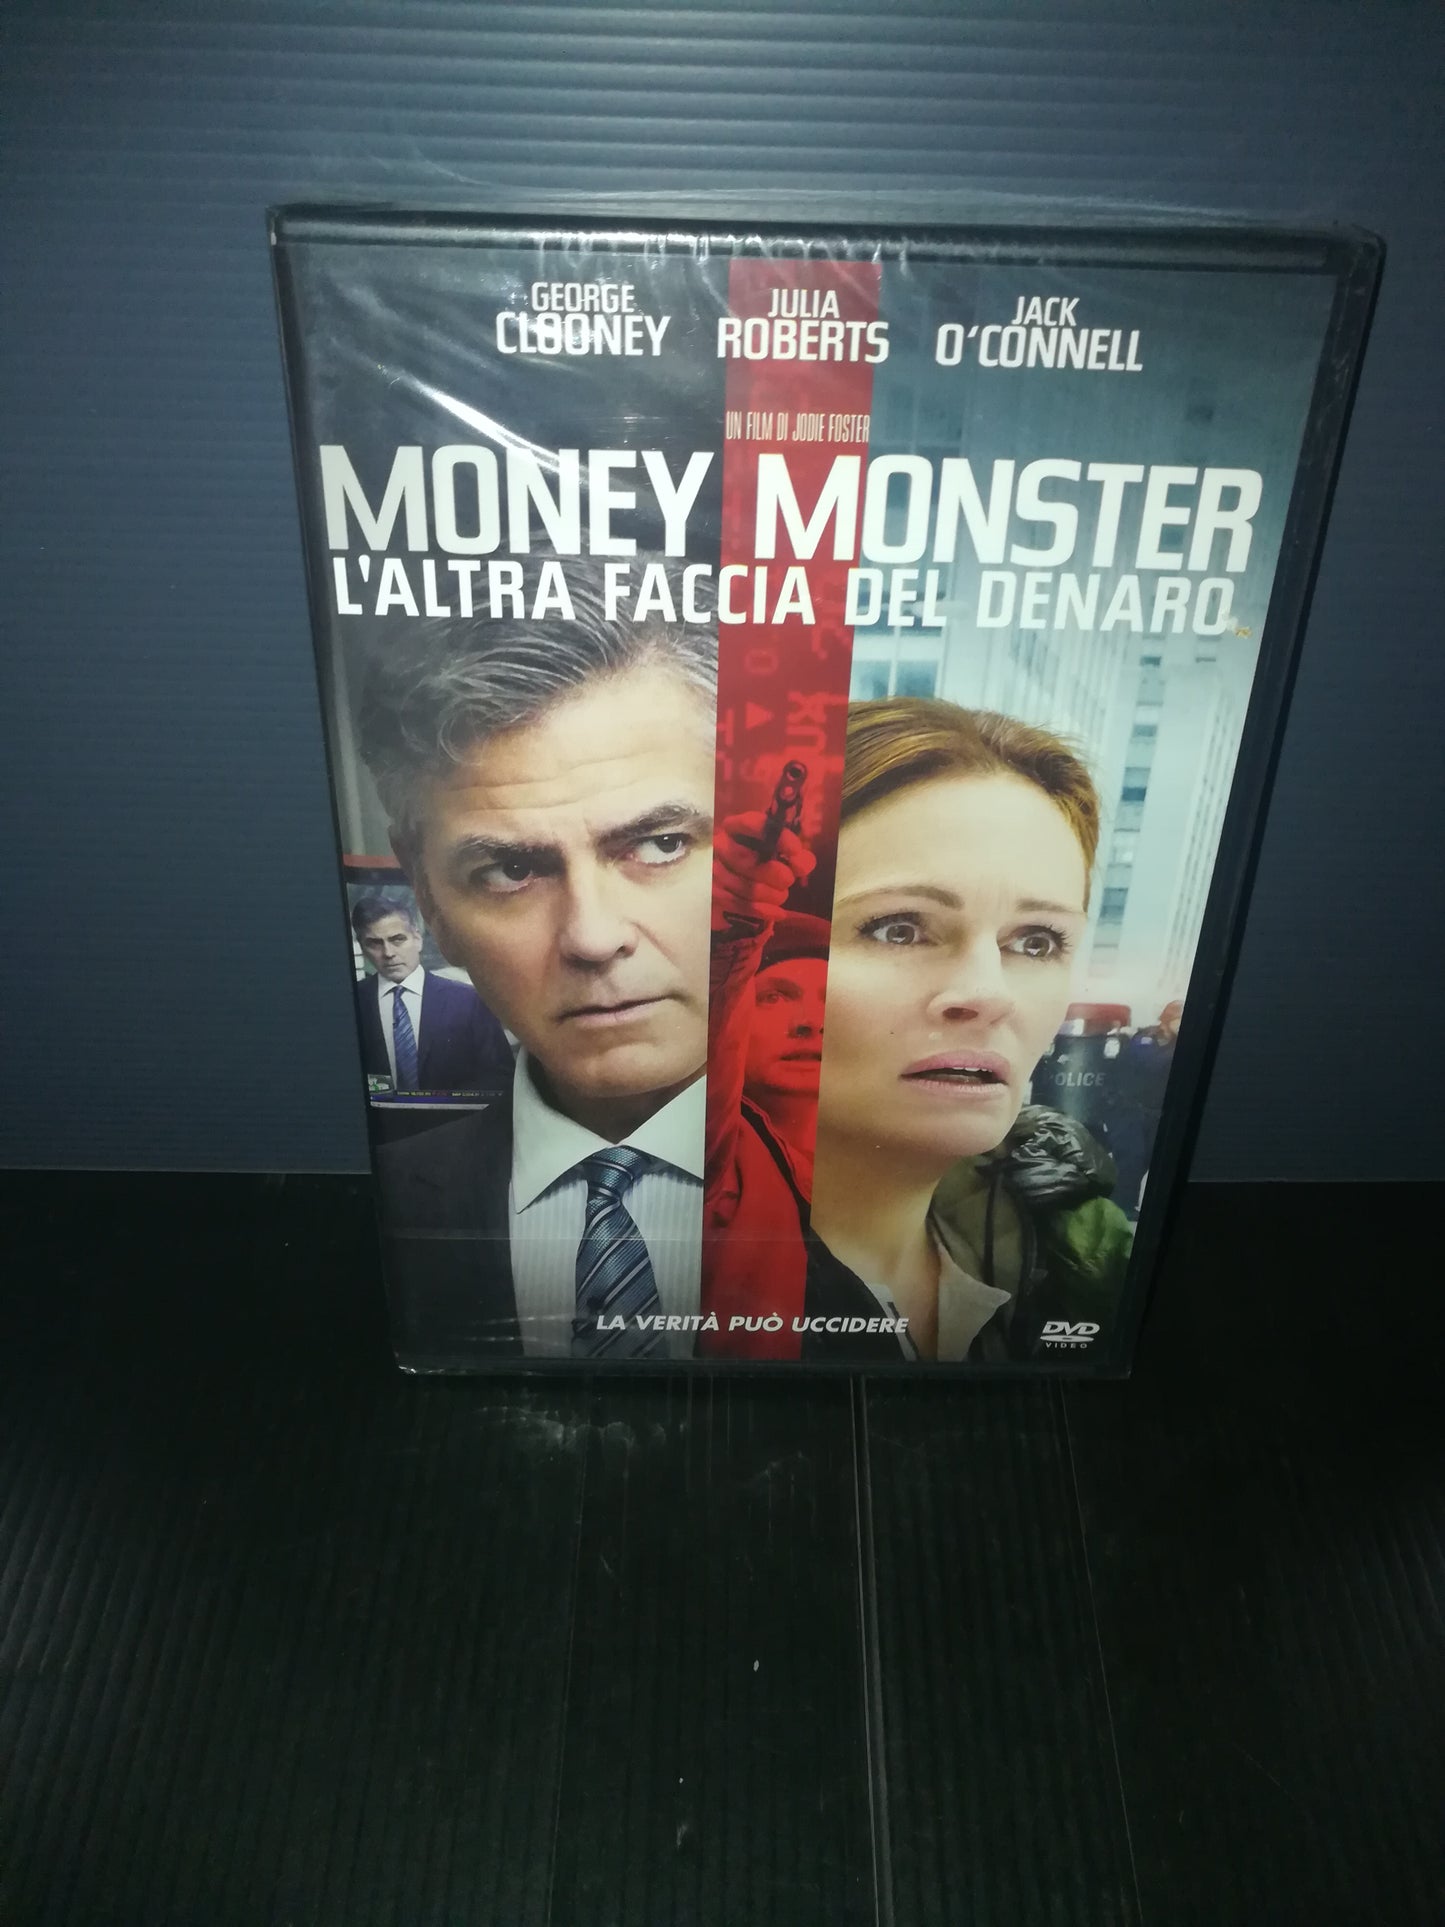 "Money Monster. The other side of money" Clooney/Roberts DVD